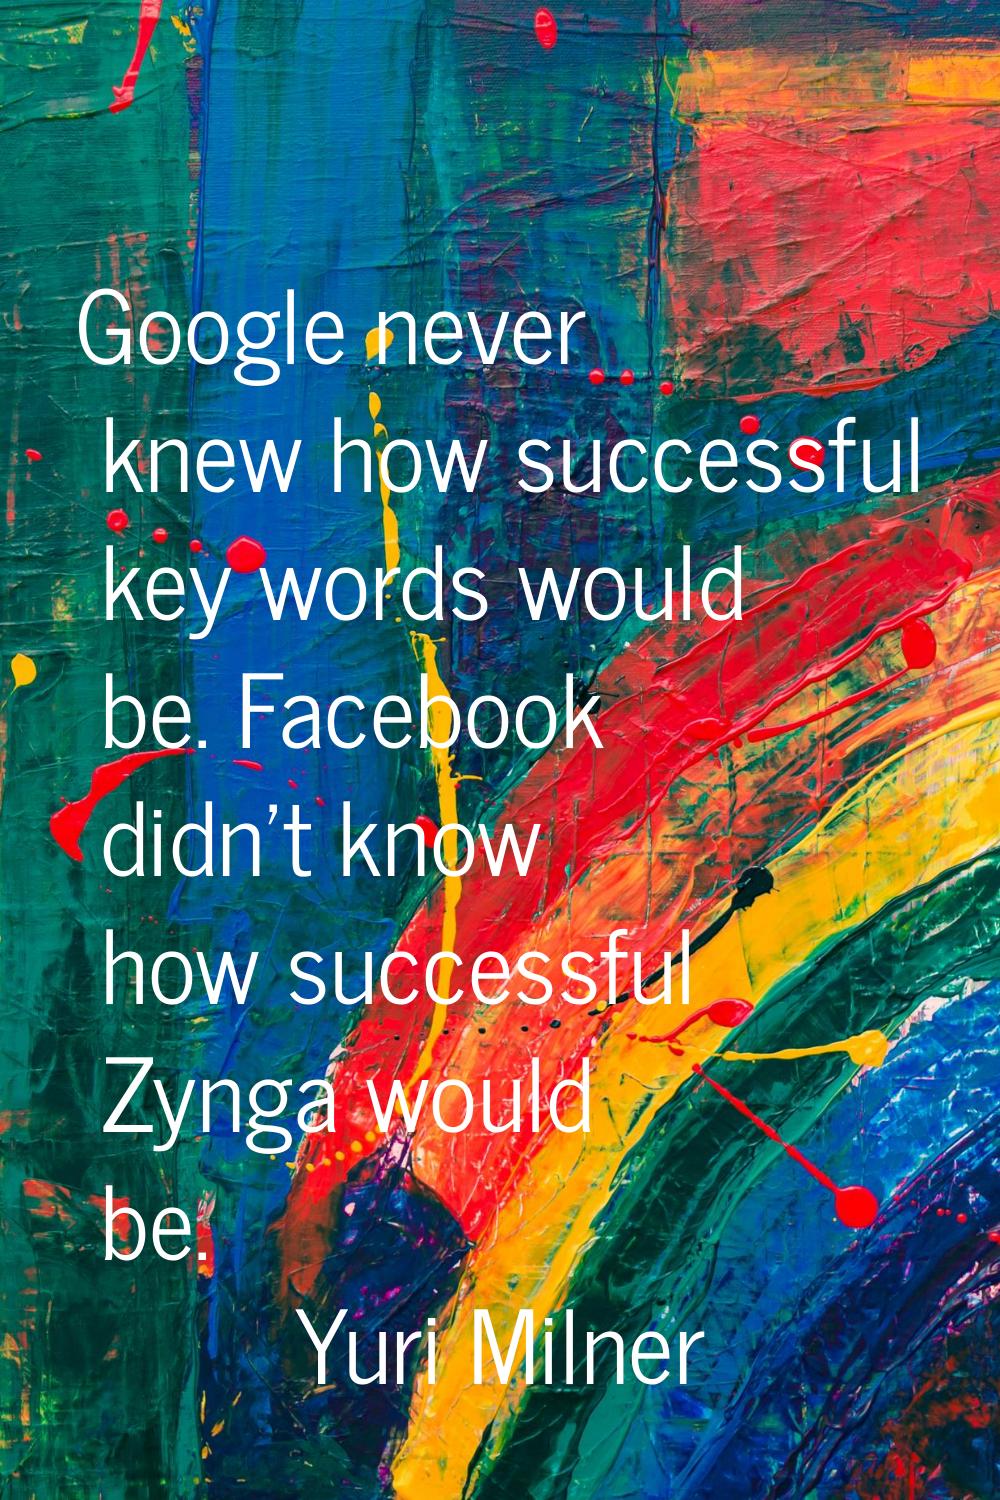 Google never knew how successful key words would be. Facebook didn't know how successful Zynga woul